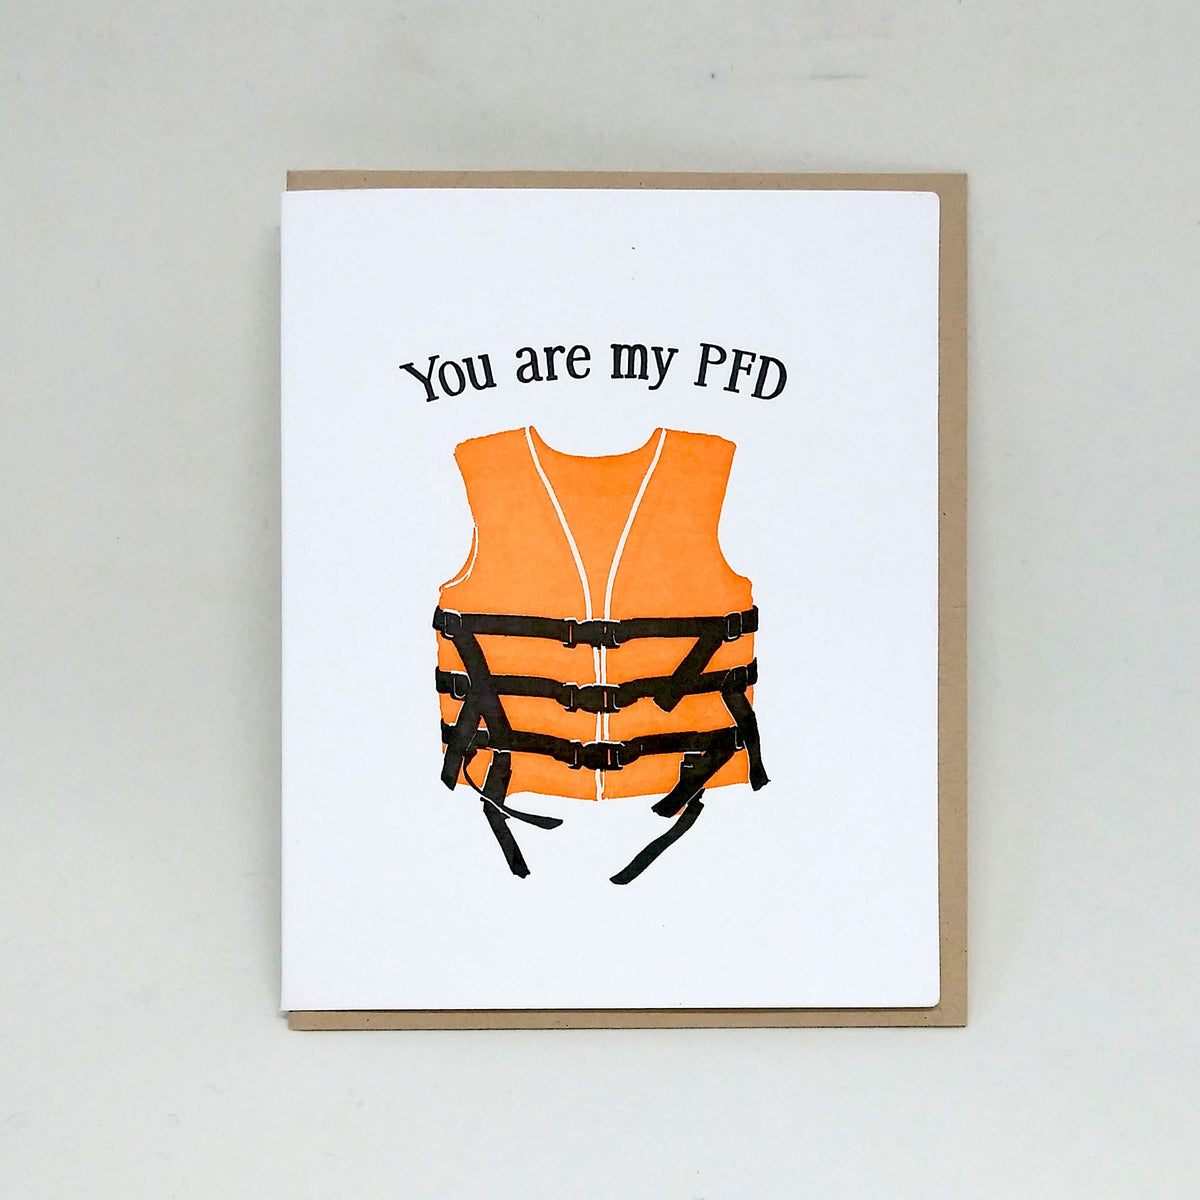 You are my PFD